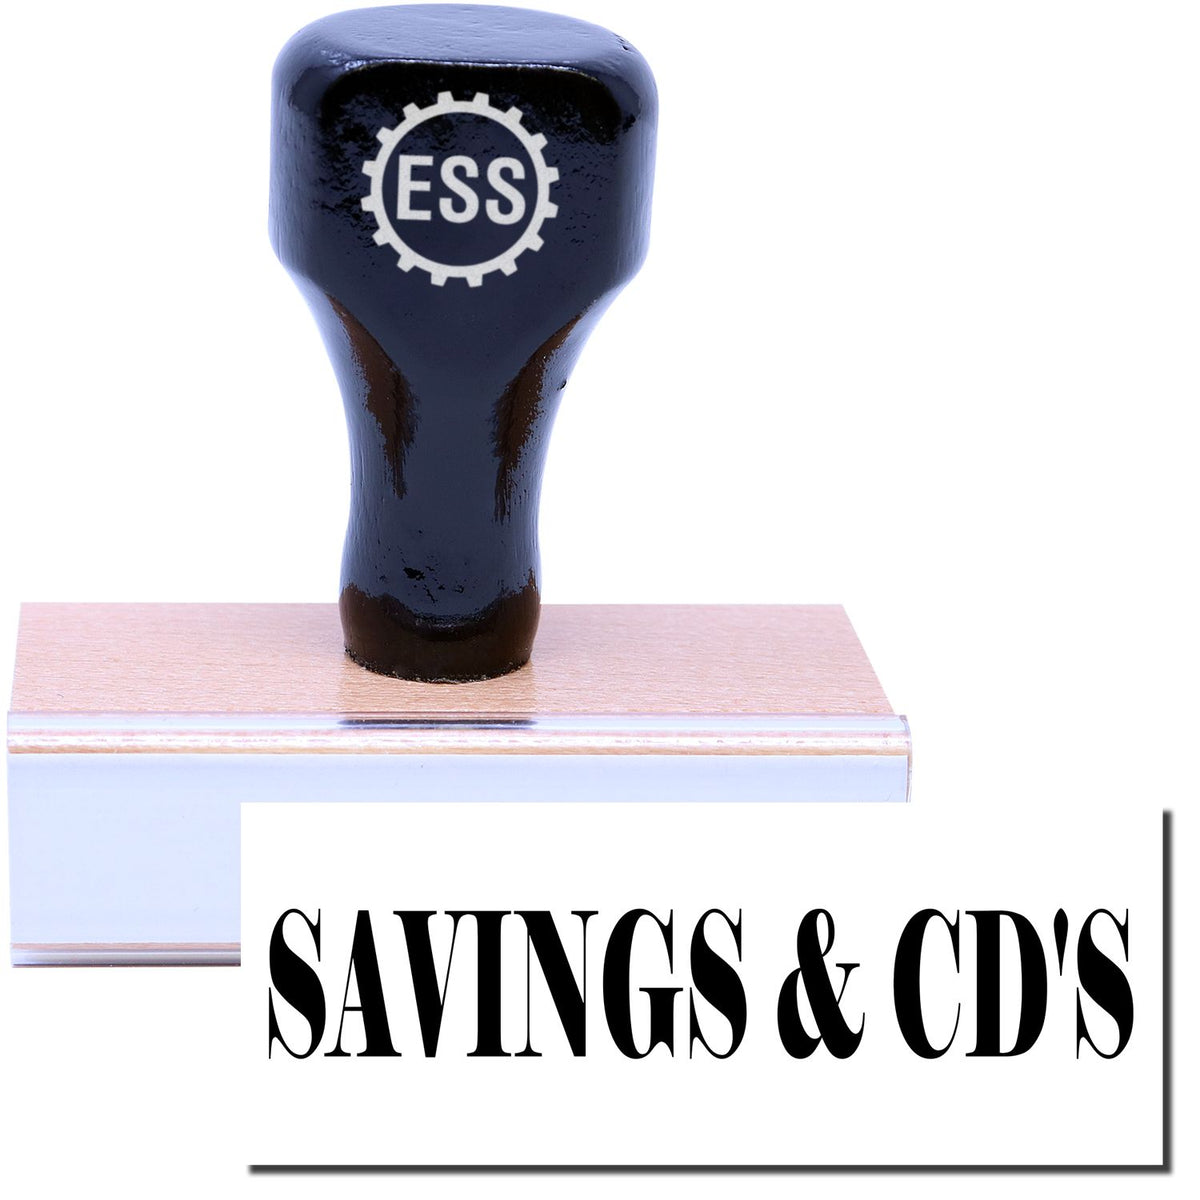 A stock office rubber stamp with a stamped image showing how the text &quot;SAVINGS &amp; CD&#39;S&quot; in a large font is displayed after stamping.